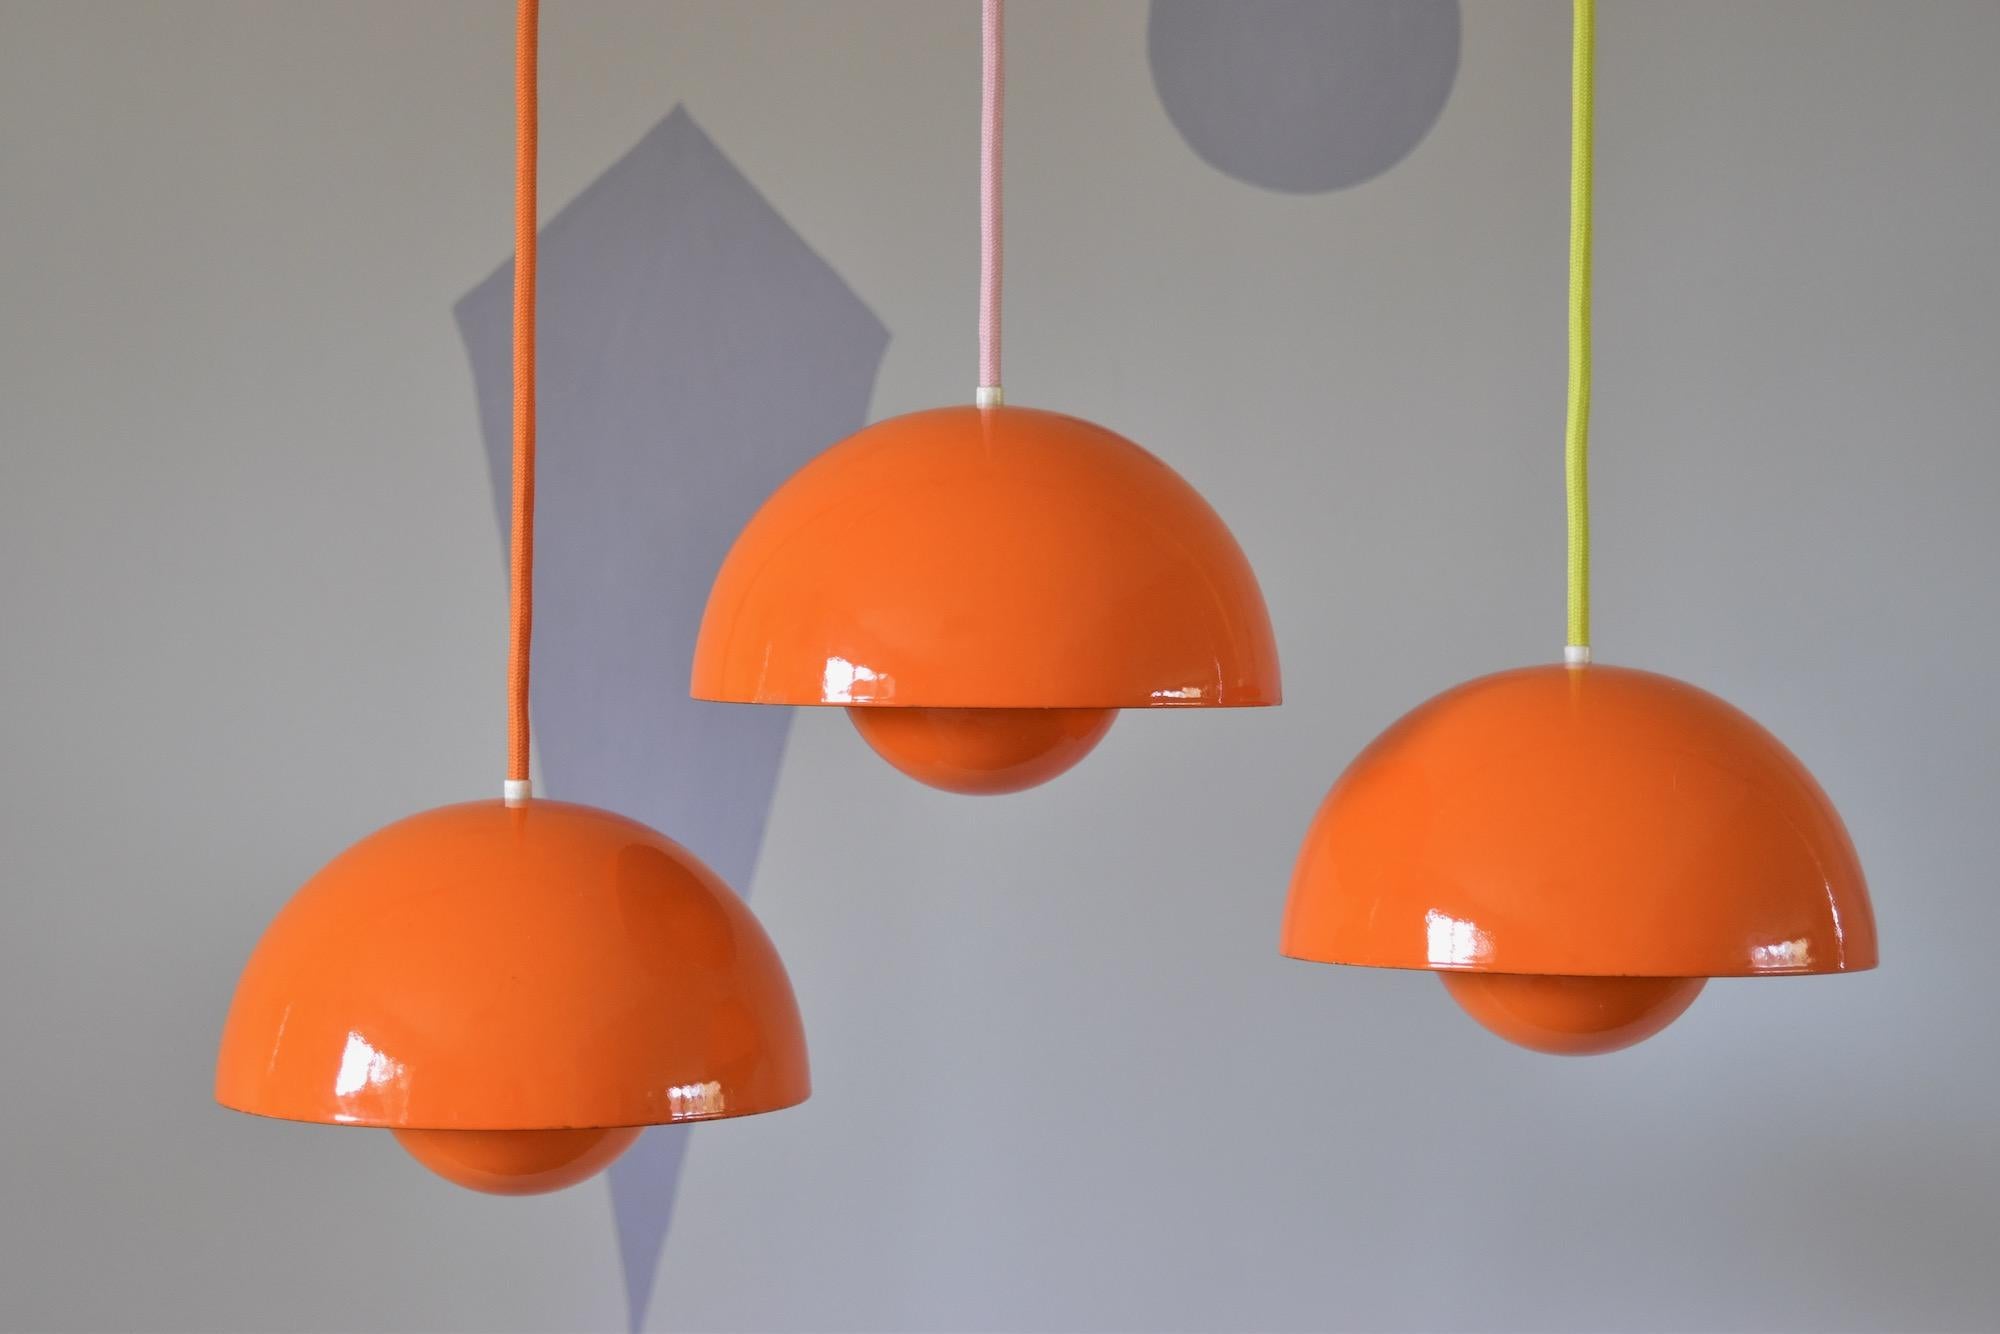 Nice vintage orange enamel flowerpot pendant lamp design Verner Panton in 1968 produced by Louis Poulsen, Made in Denmark. The enameled metal version is no more in production. The lamp is in good condition. No parts missing, with new orange fabric